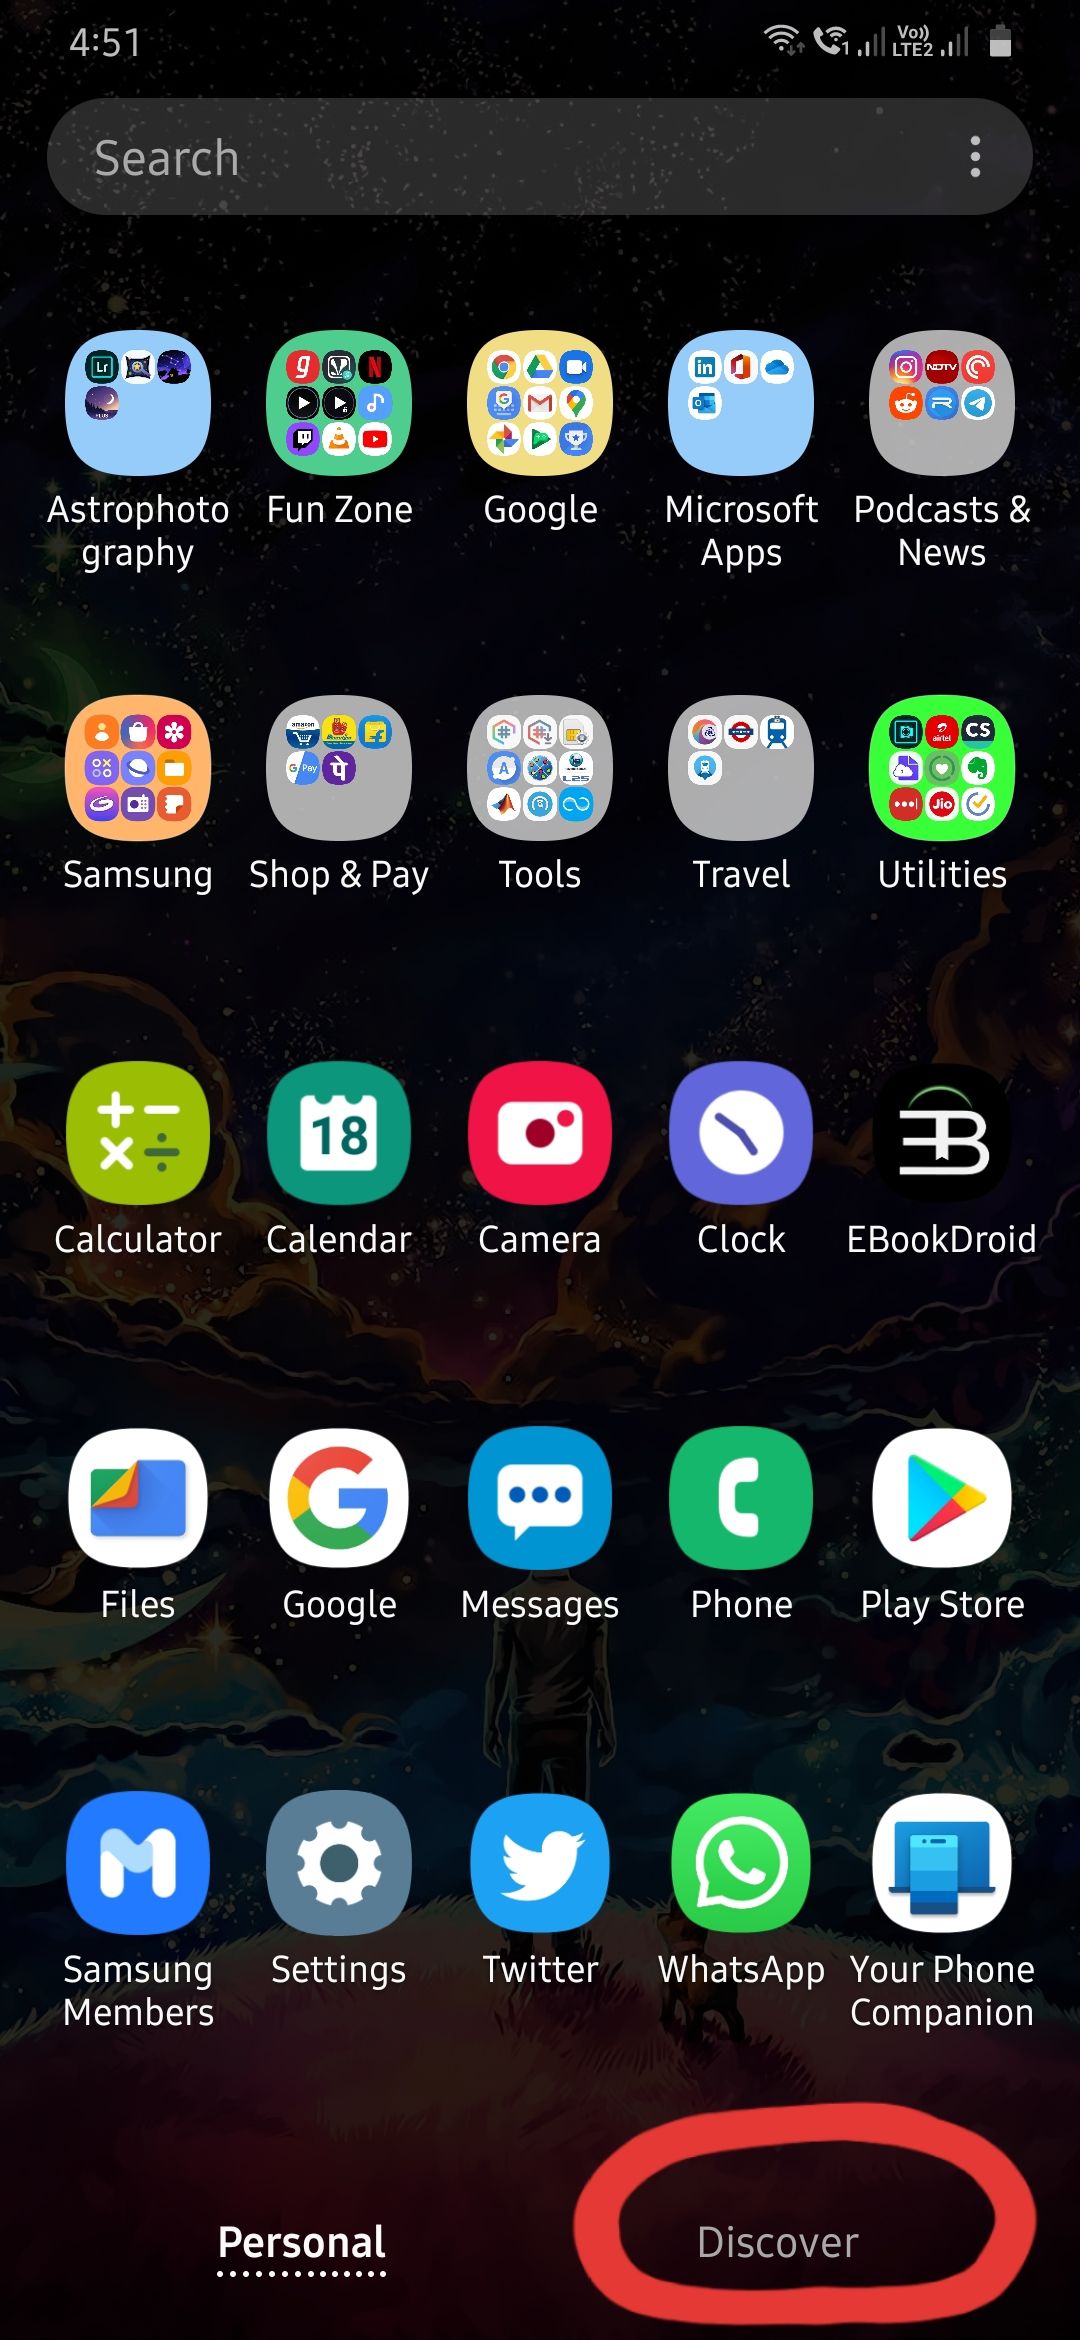 M30s- Removing the Discover Option from App Screen